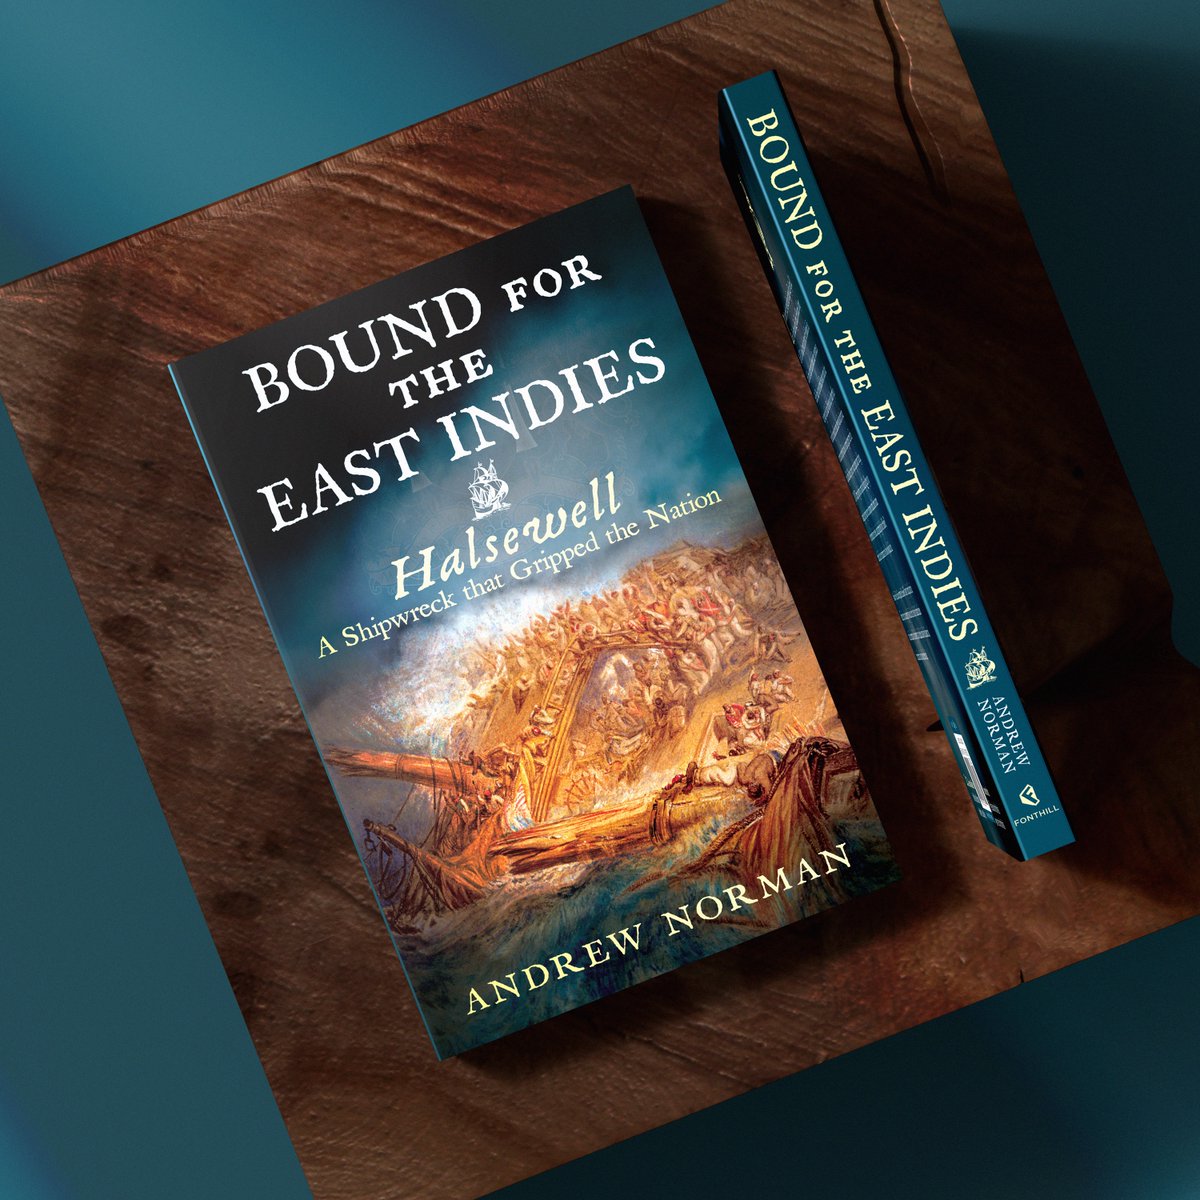 Available now: 'BOUND FOR THE EAST INDIES: HALSEWELL – A SHIPWRECK THAT GRIPPED THE NATION'
👉🏼 fml.pub/halsewell
The loss of HCS #Halsewell in January 1786 touched the very heart of the British nation.
 #Shipwreck #History #HistoryBooks #Shipping #EastIndianCompany #books